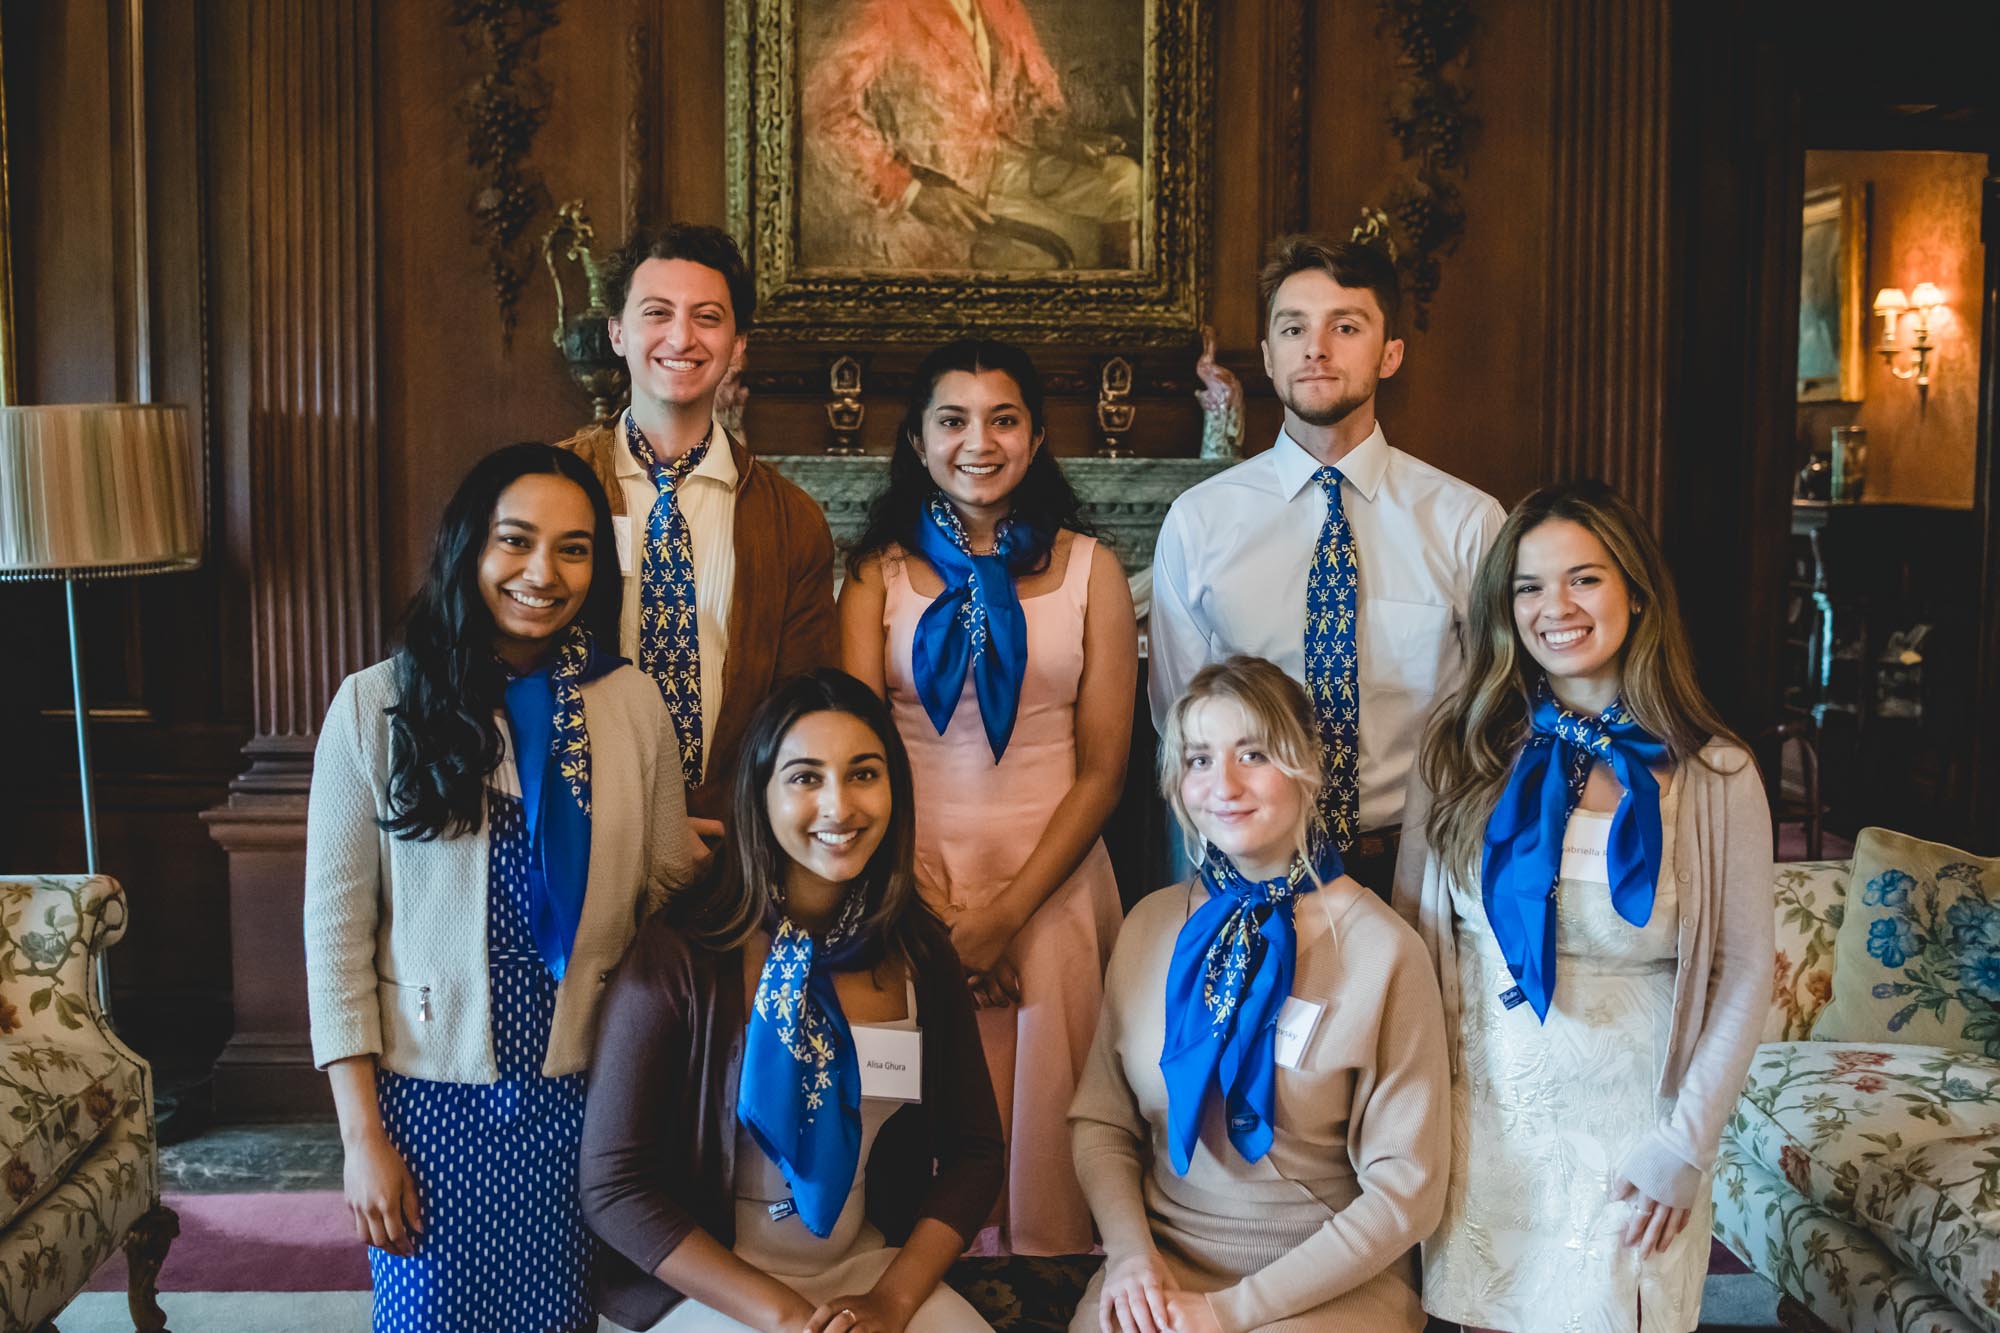 American Scholars who will be studying in the U.K. next year pose for a group photo wearing their scarves and ties.